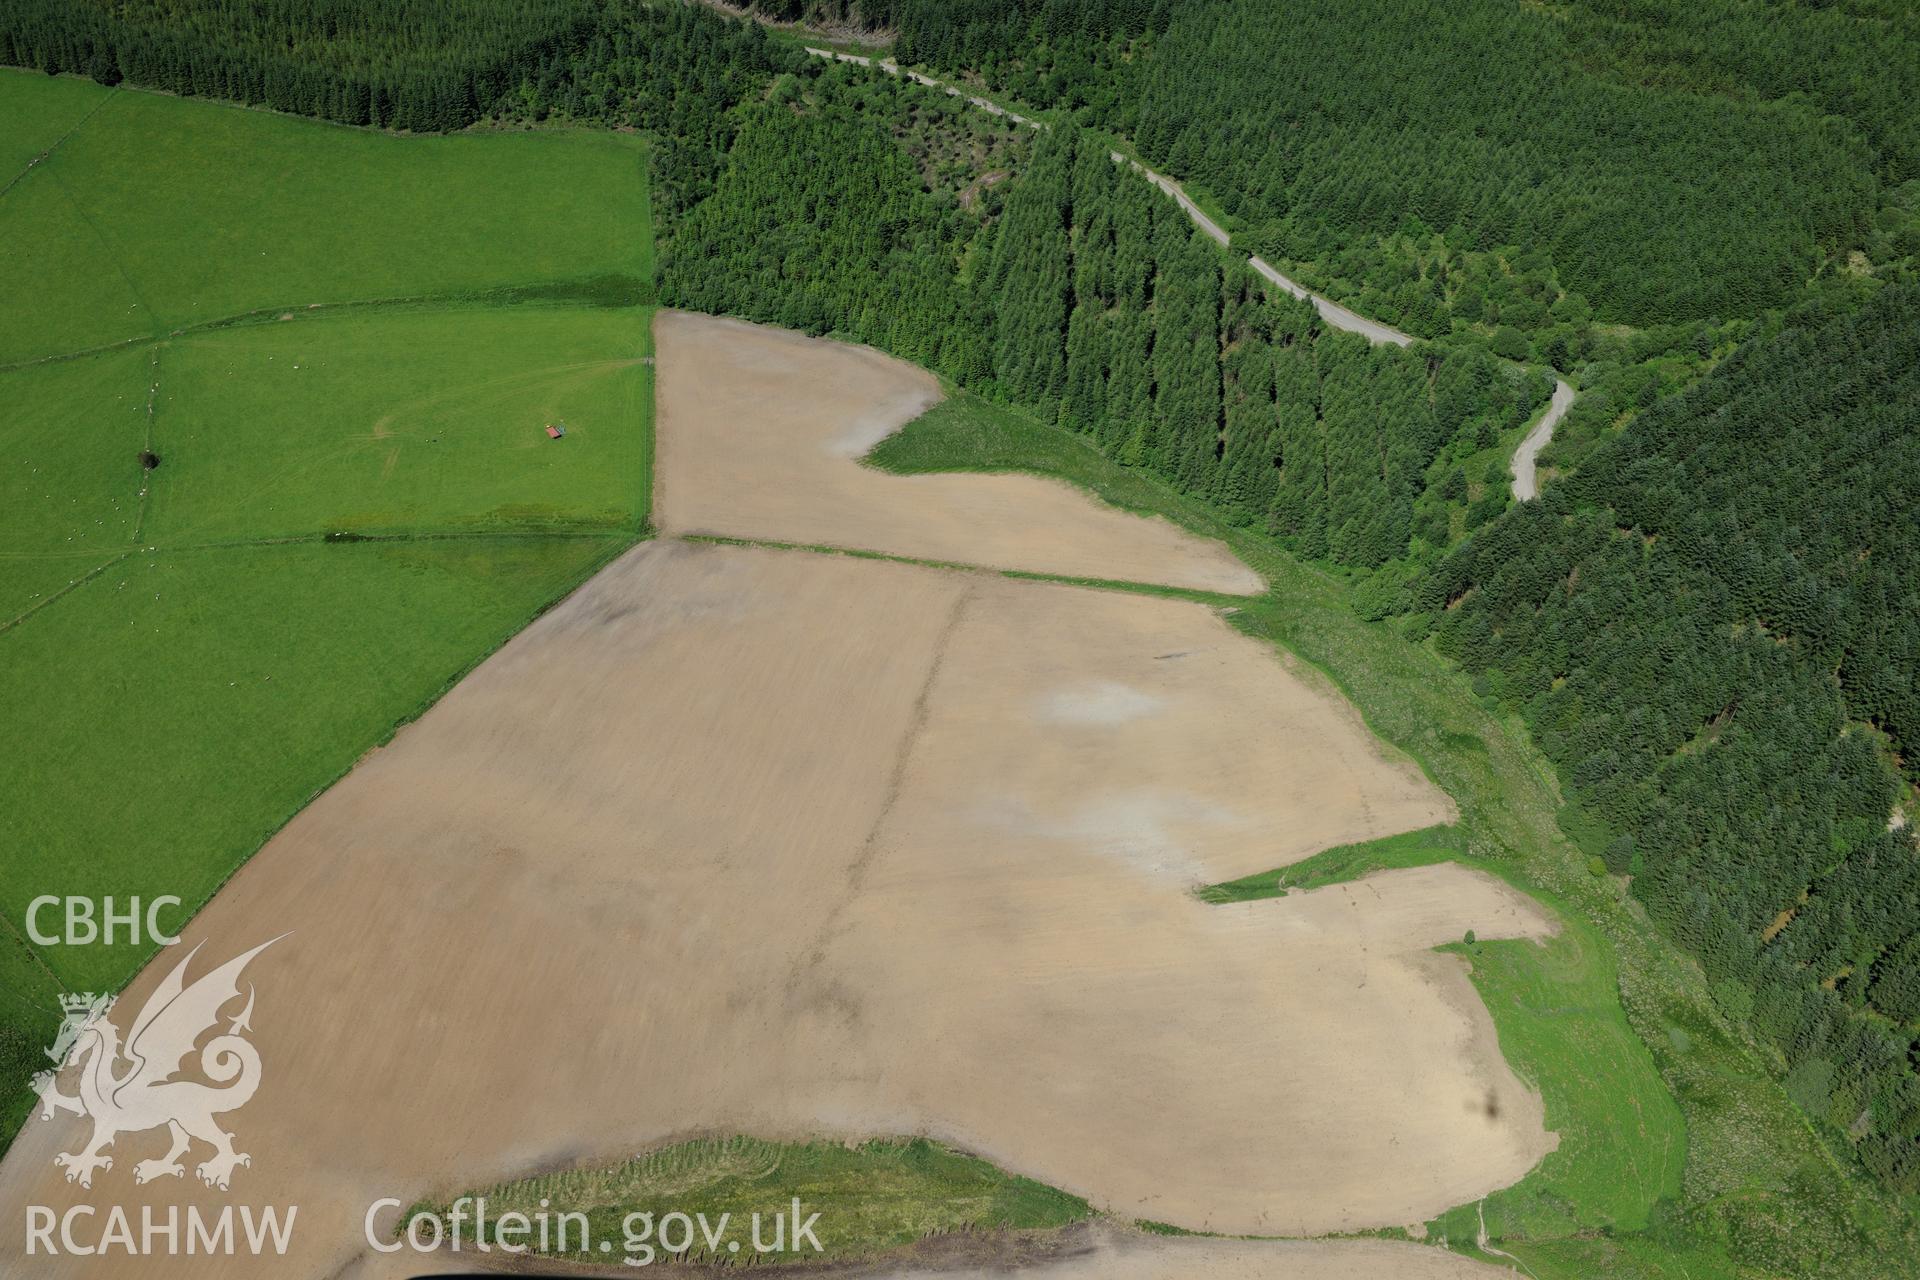 Abererbwll Roman fortlet, south west of Llanwrtyd Wells. Oblique aerial photograph taken during the Royal Commission's programme of archaeological aerial reconnaissance by Toby Driver on 30th June 2015.